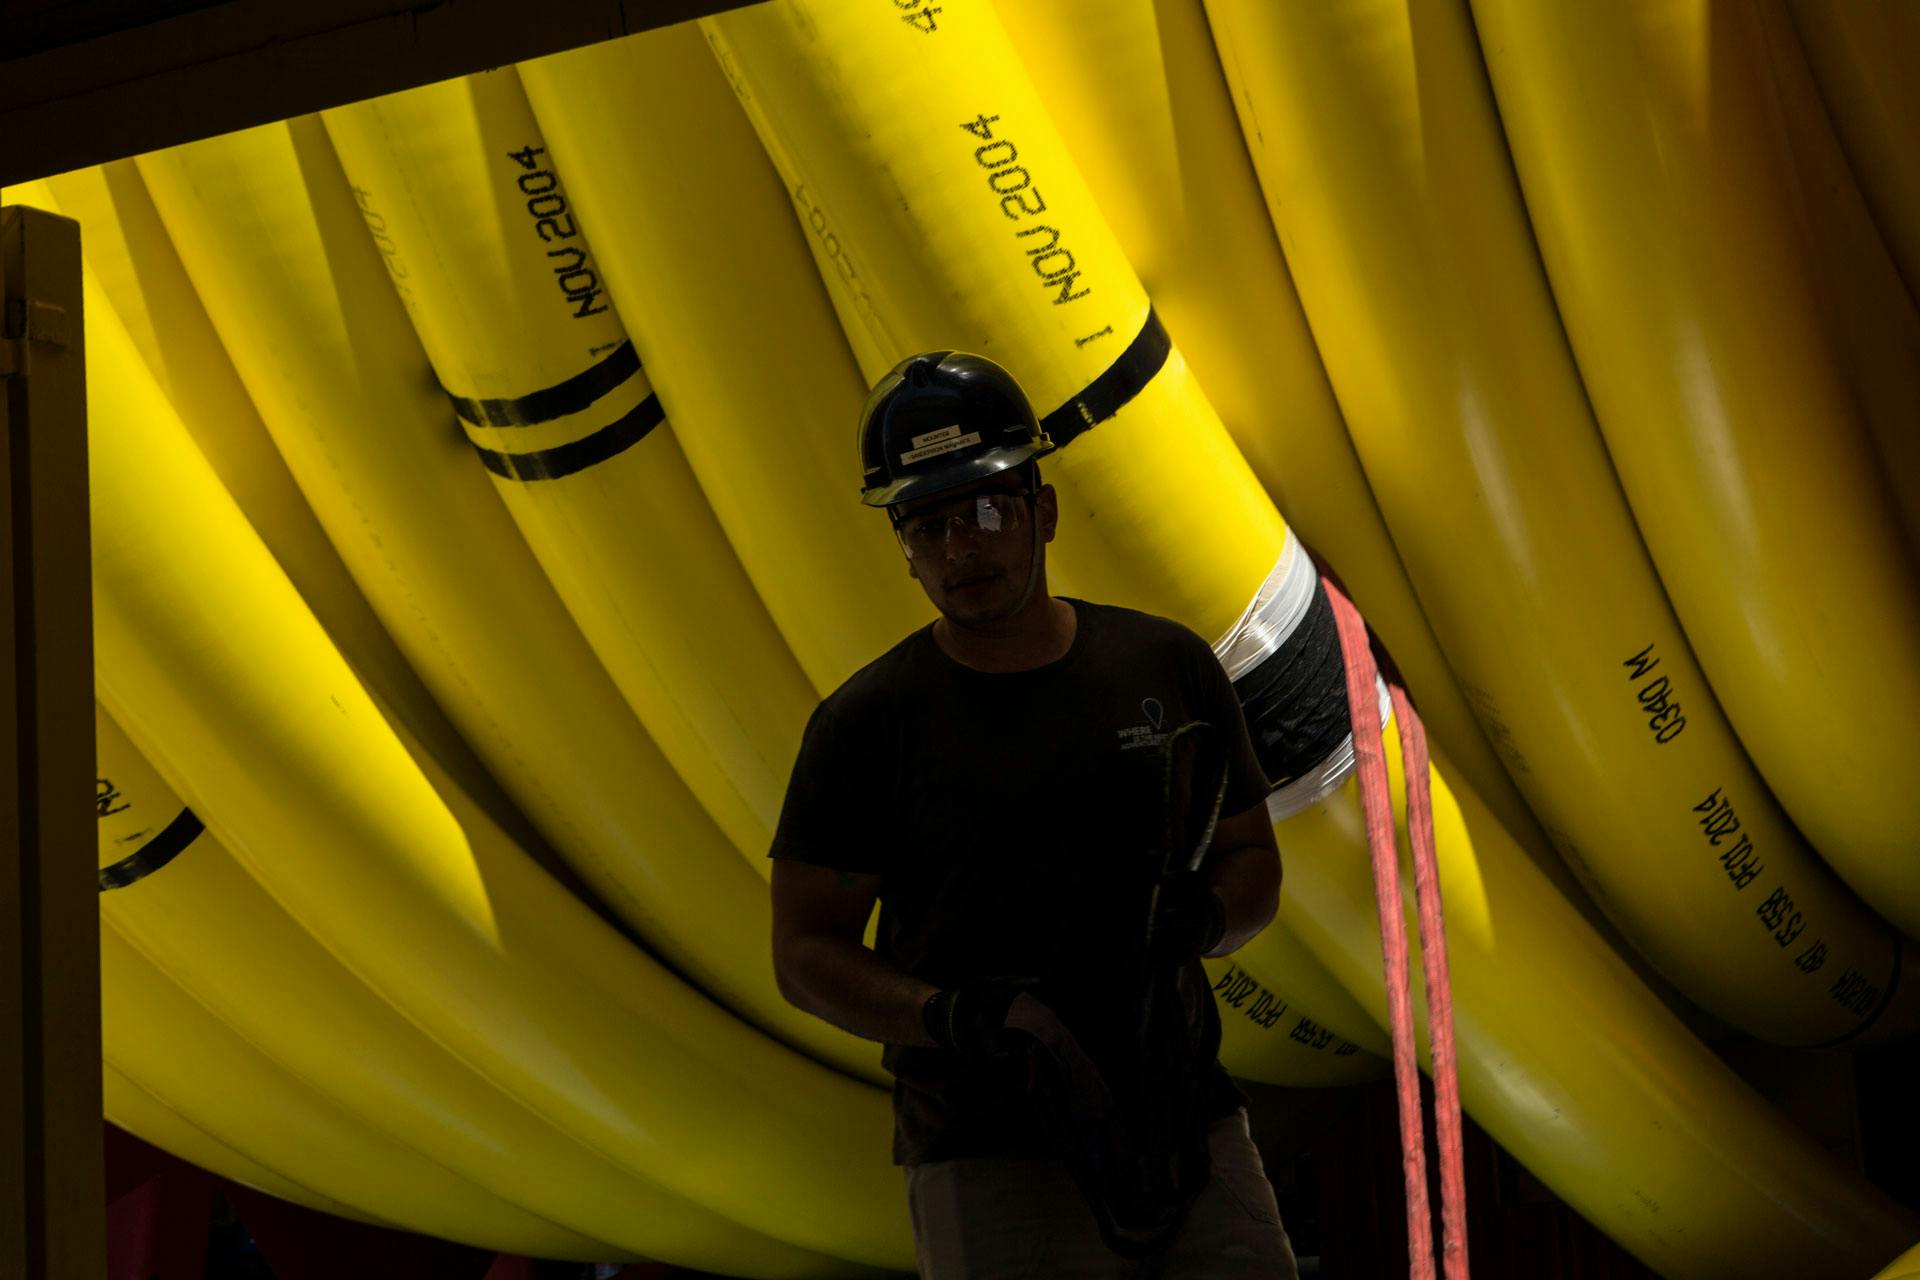 Technician standing in front of large coiled tubing